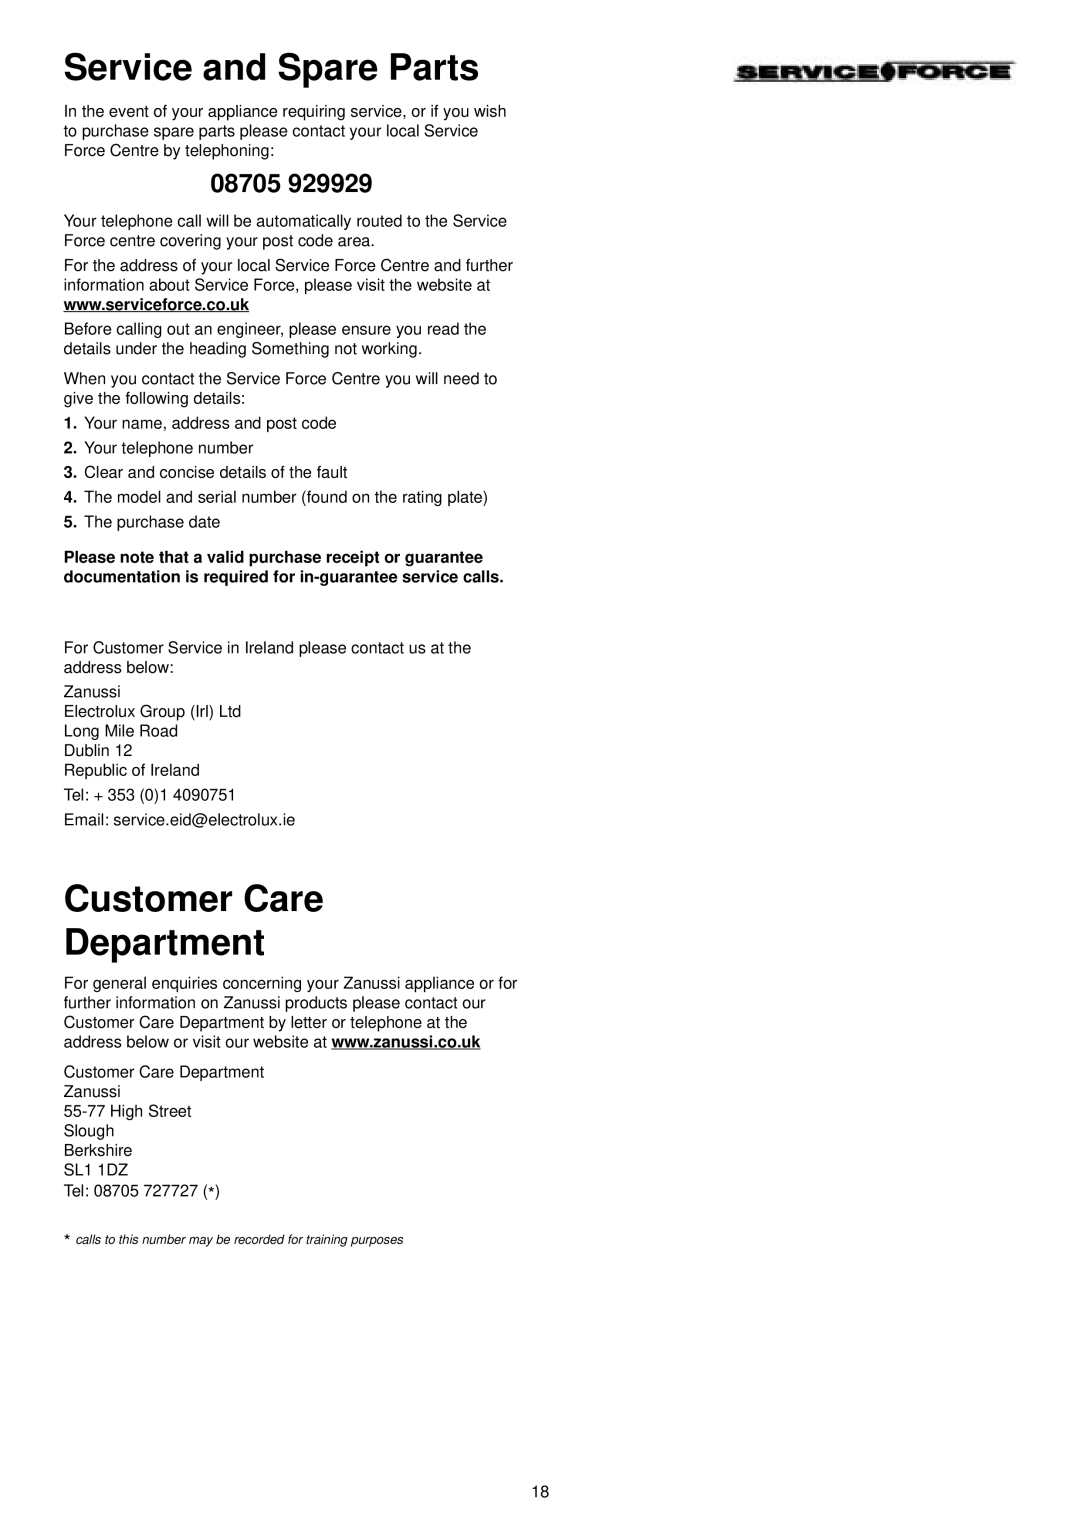 Zanussi ZDT 5044 manual Service and Spare Parts, Customer Care Department, 08705 